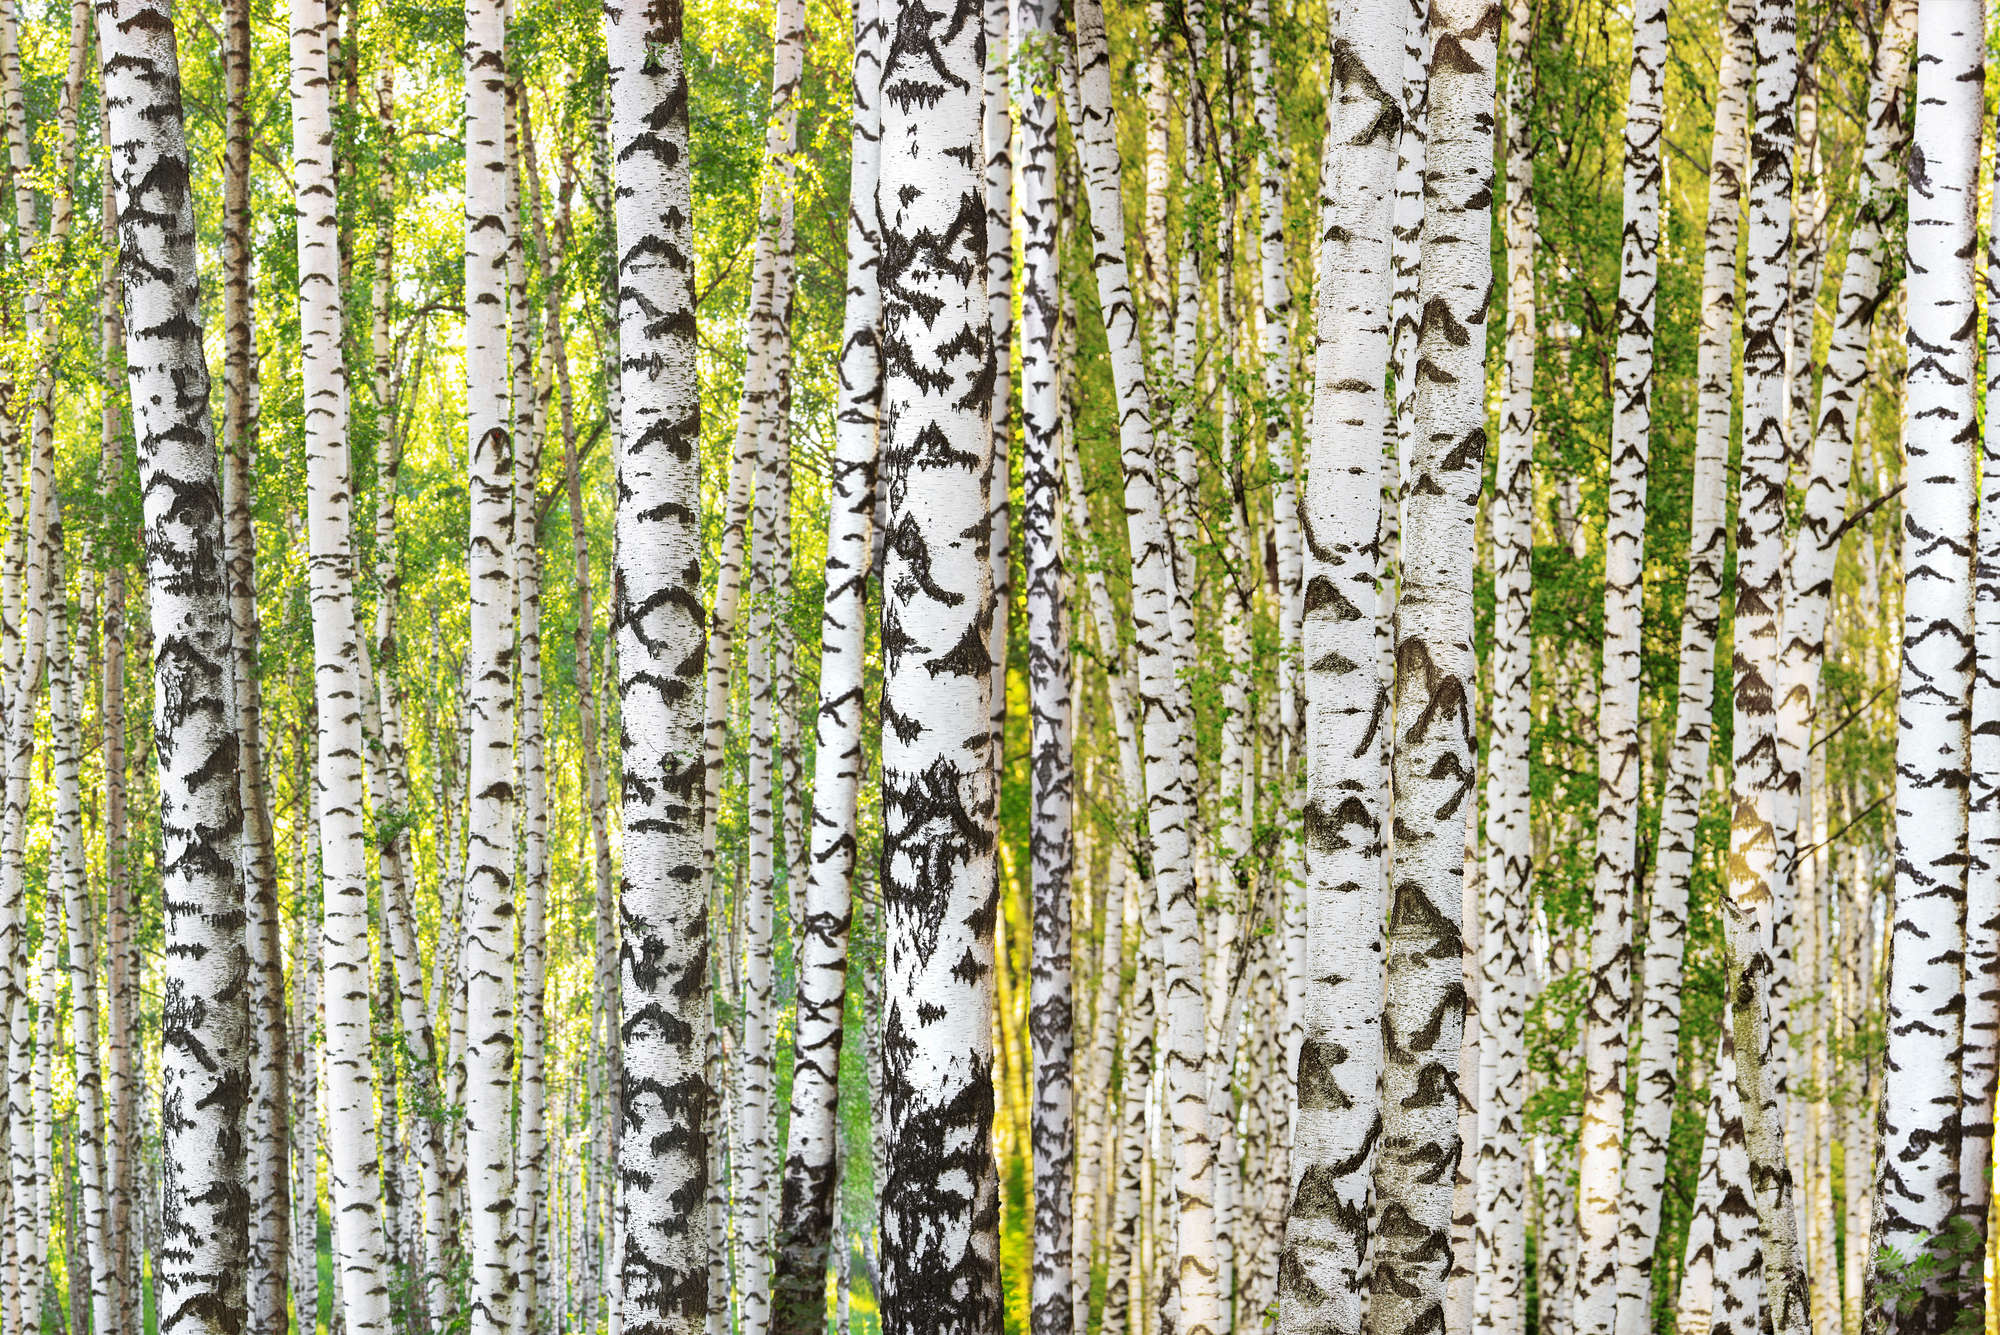             Birch forest mural tree trunk motif on mother of pearl smooth fleece
        